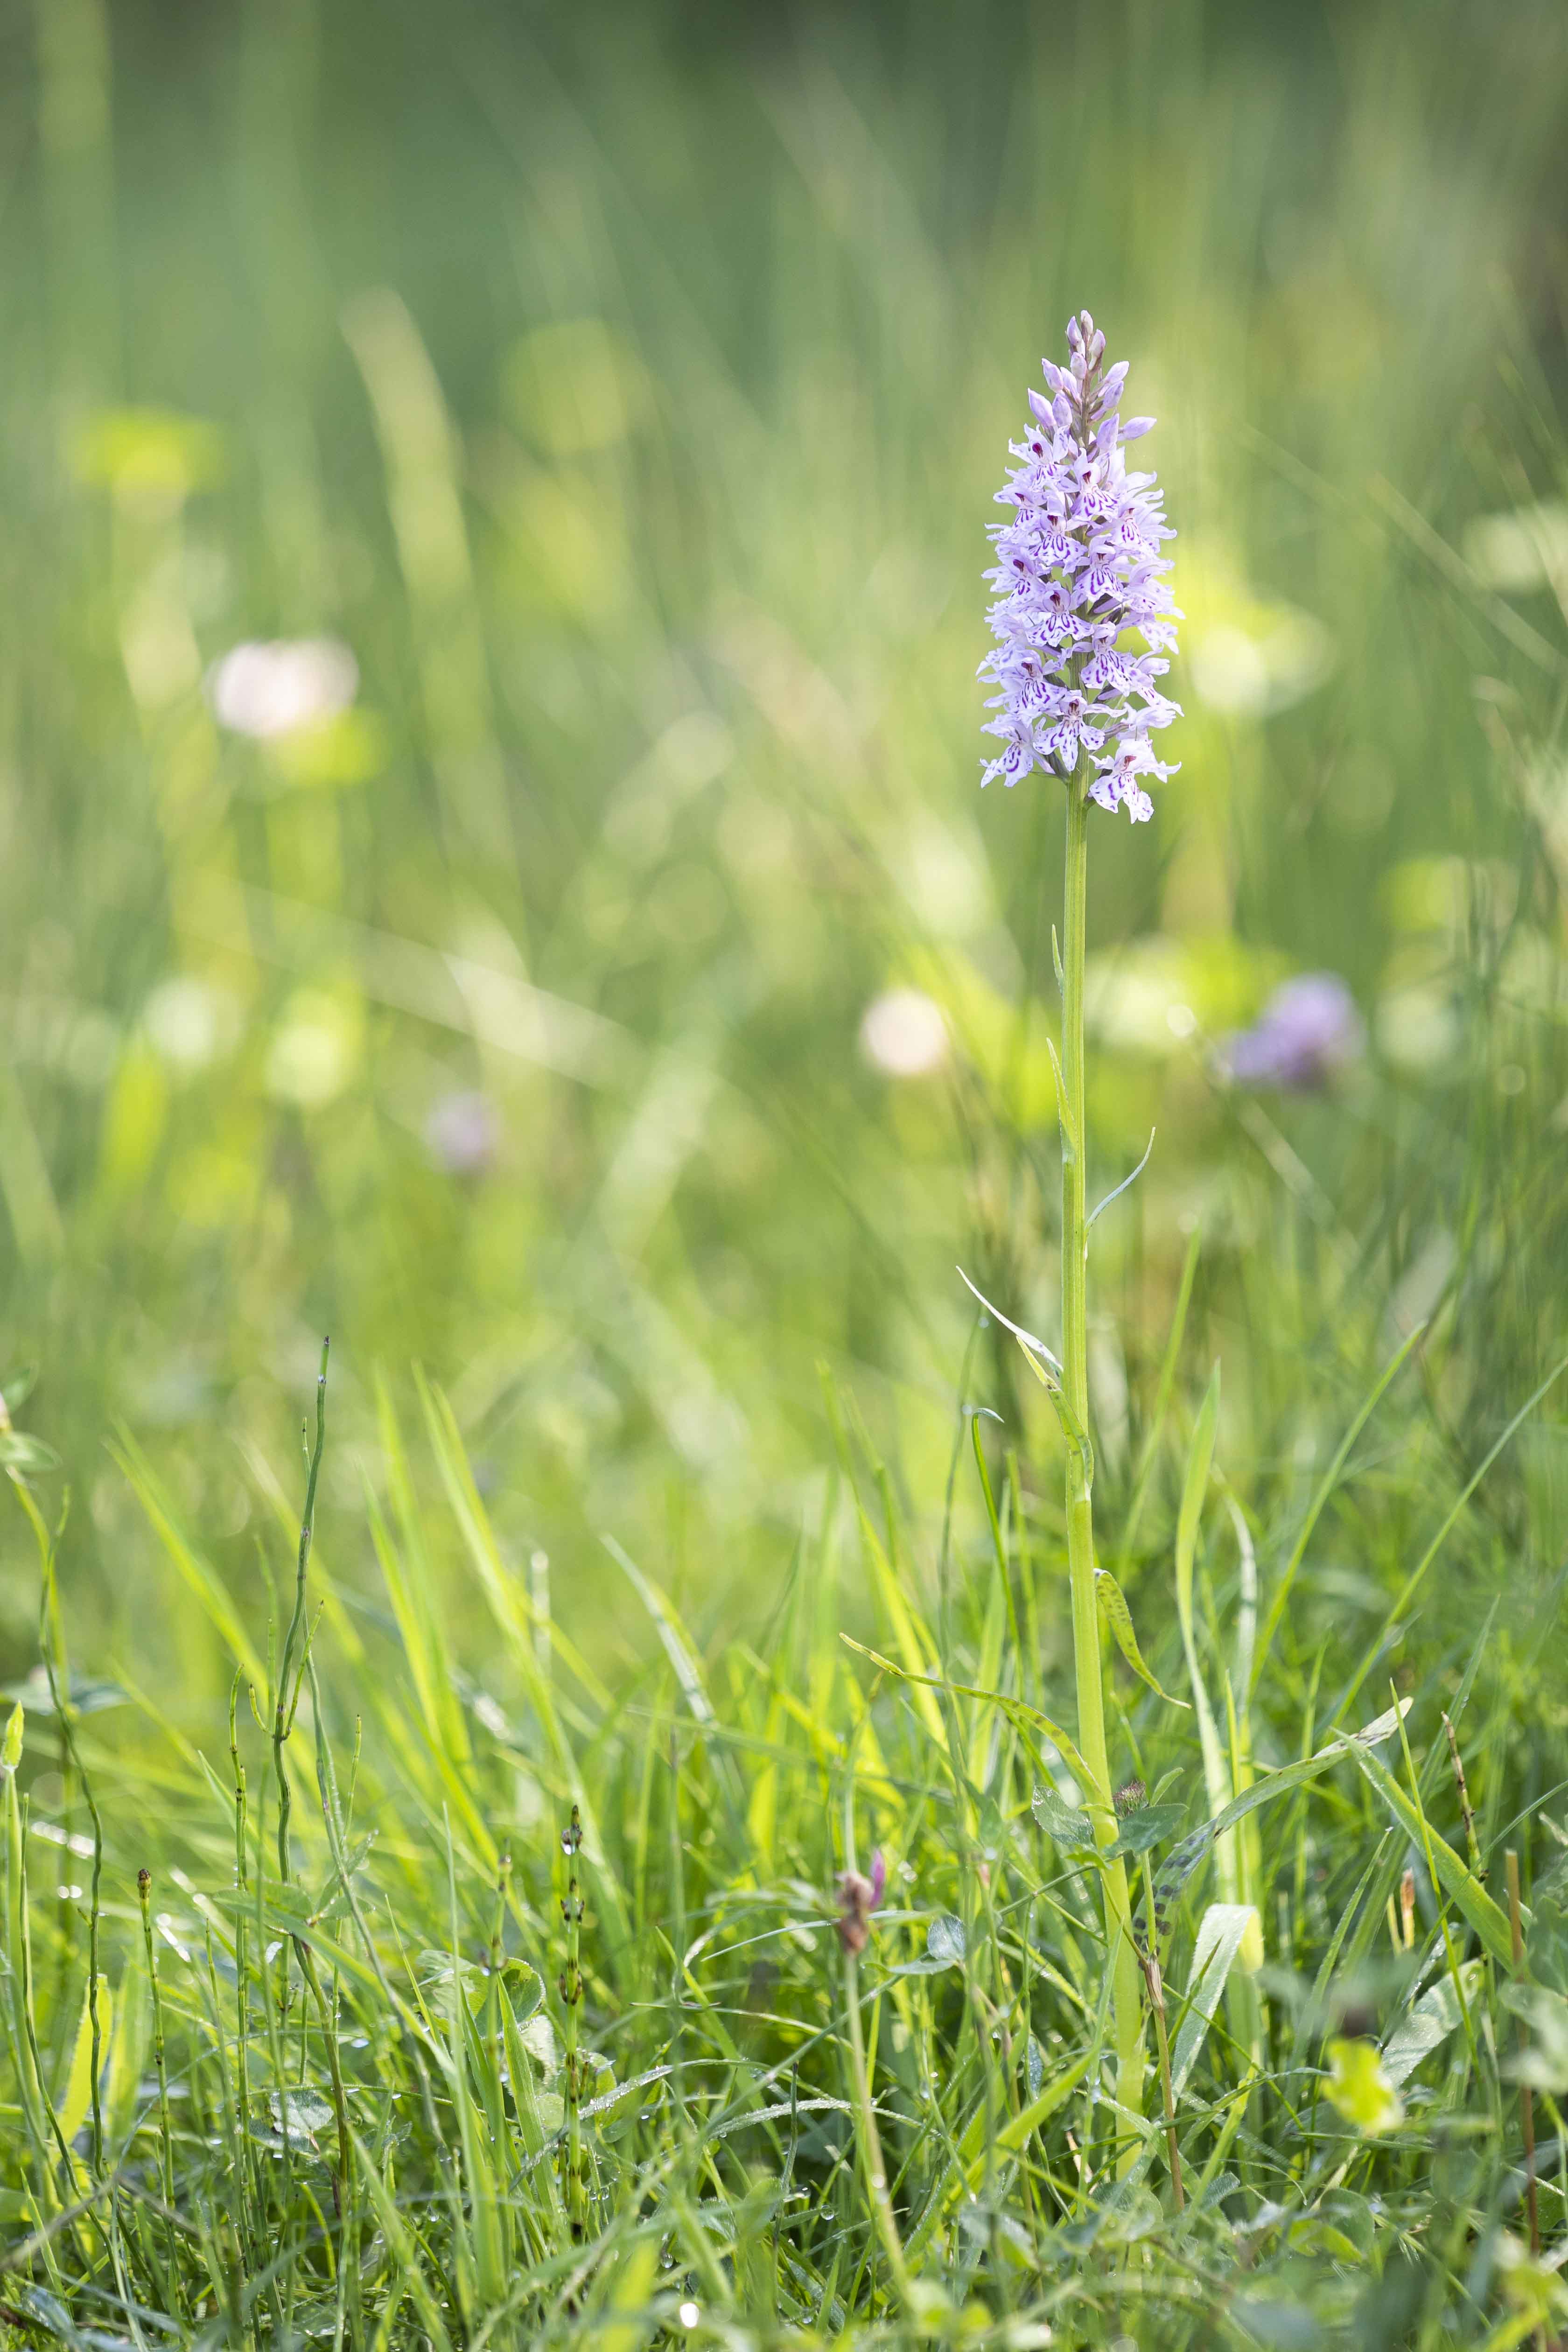 Common spotted orchid (Dactylorhiza fuchsii)